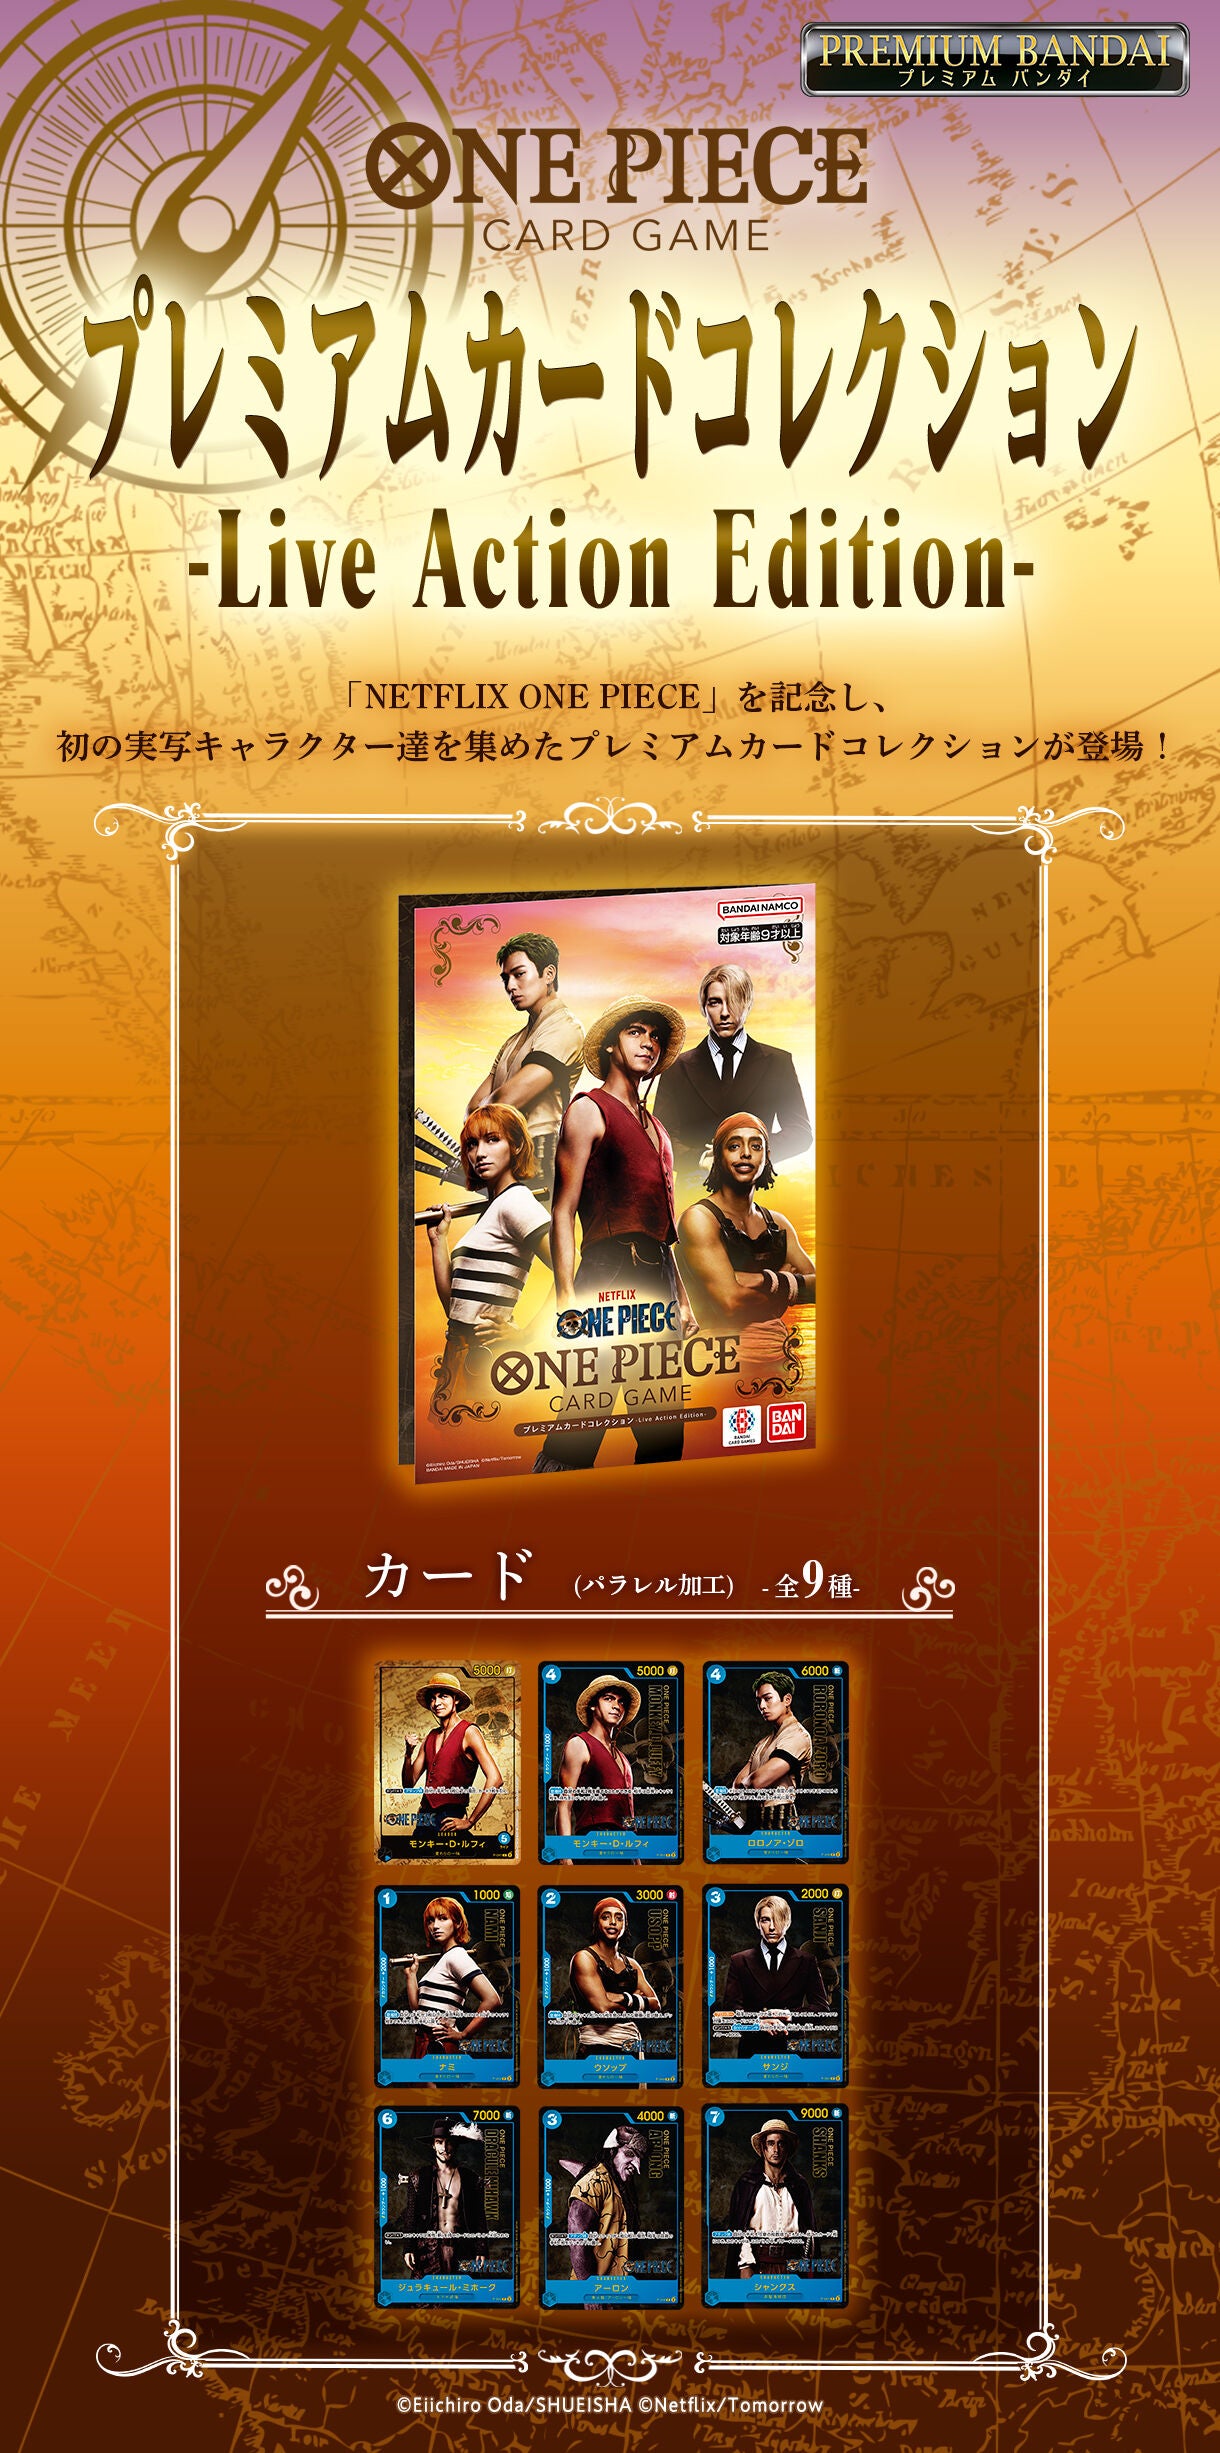 ONE PIECE CARD GAME PREMIUM CARD COLLECTION - LIVE ACTION EDITION NETFLIX